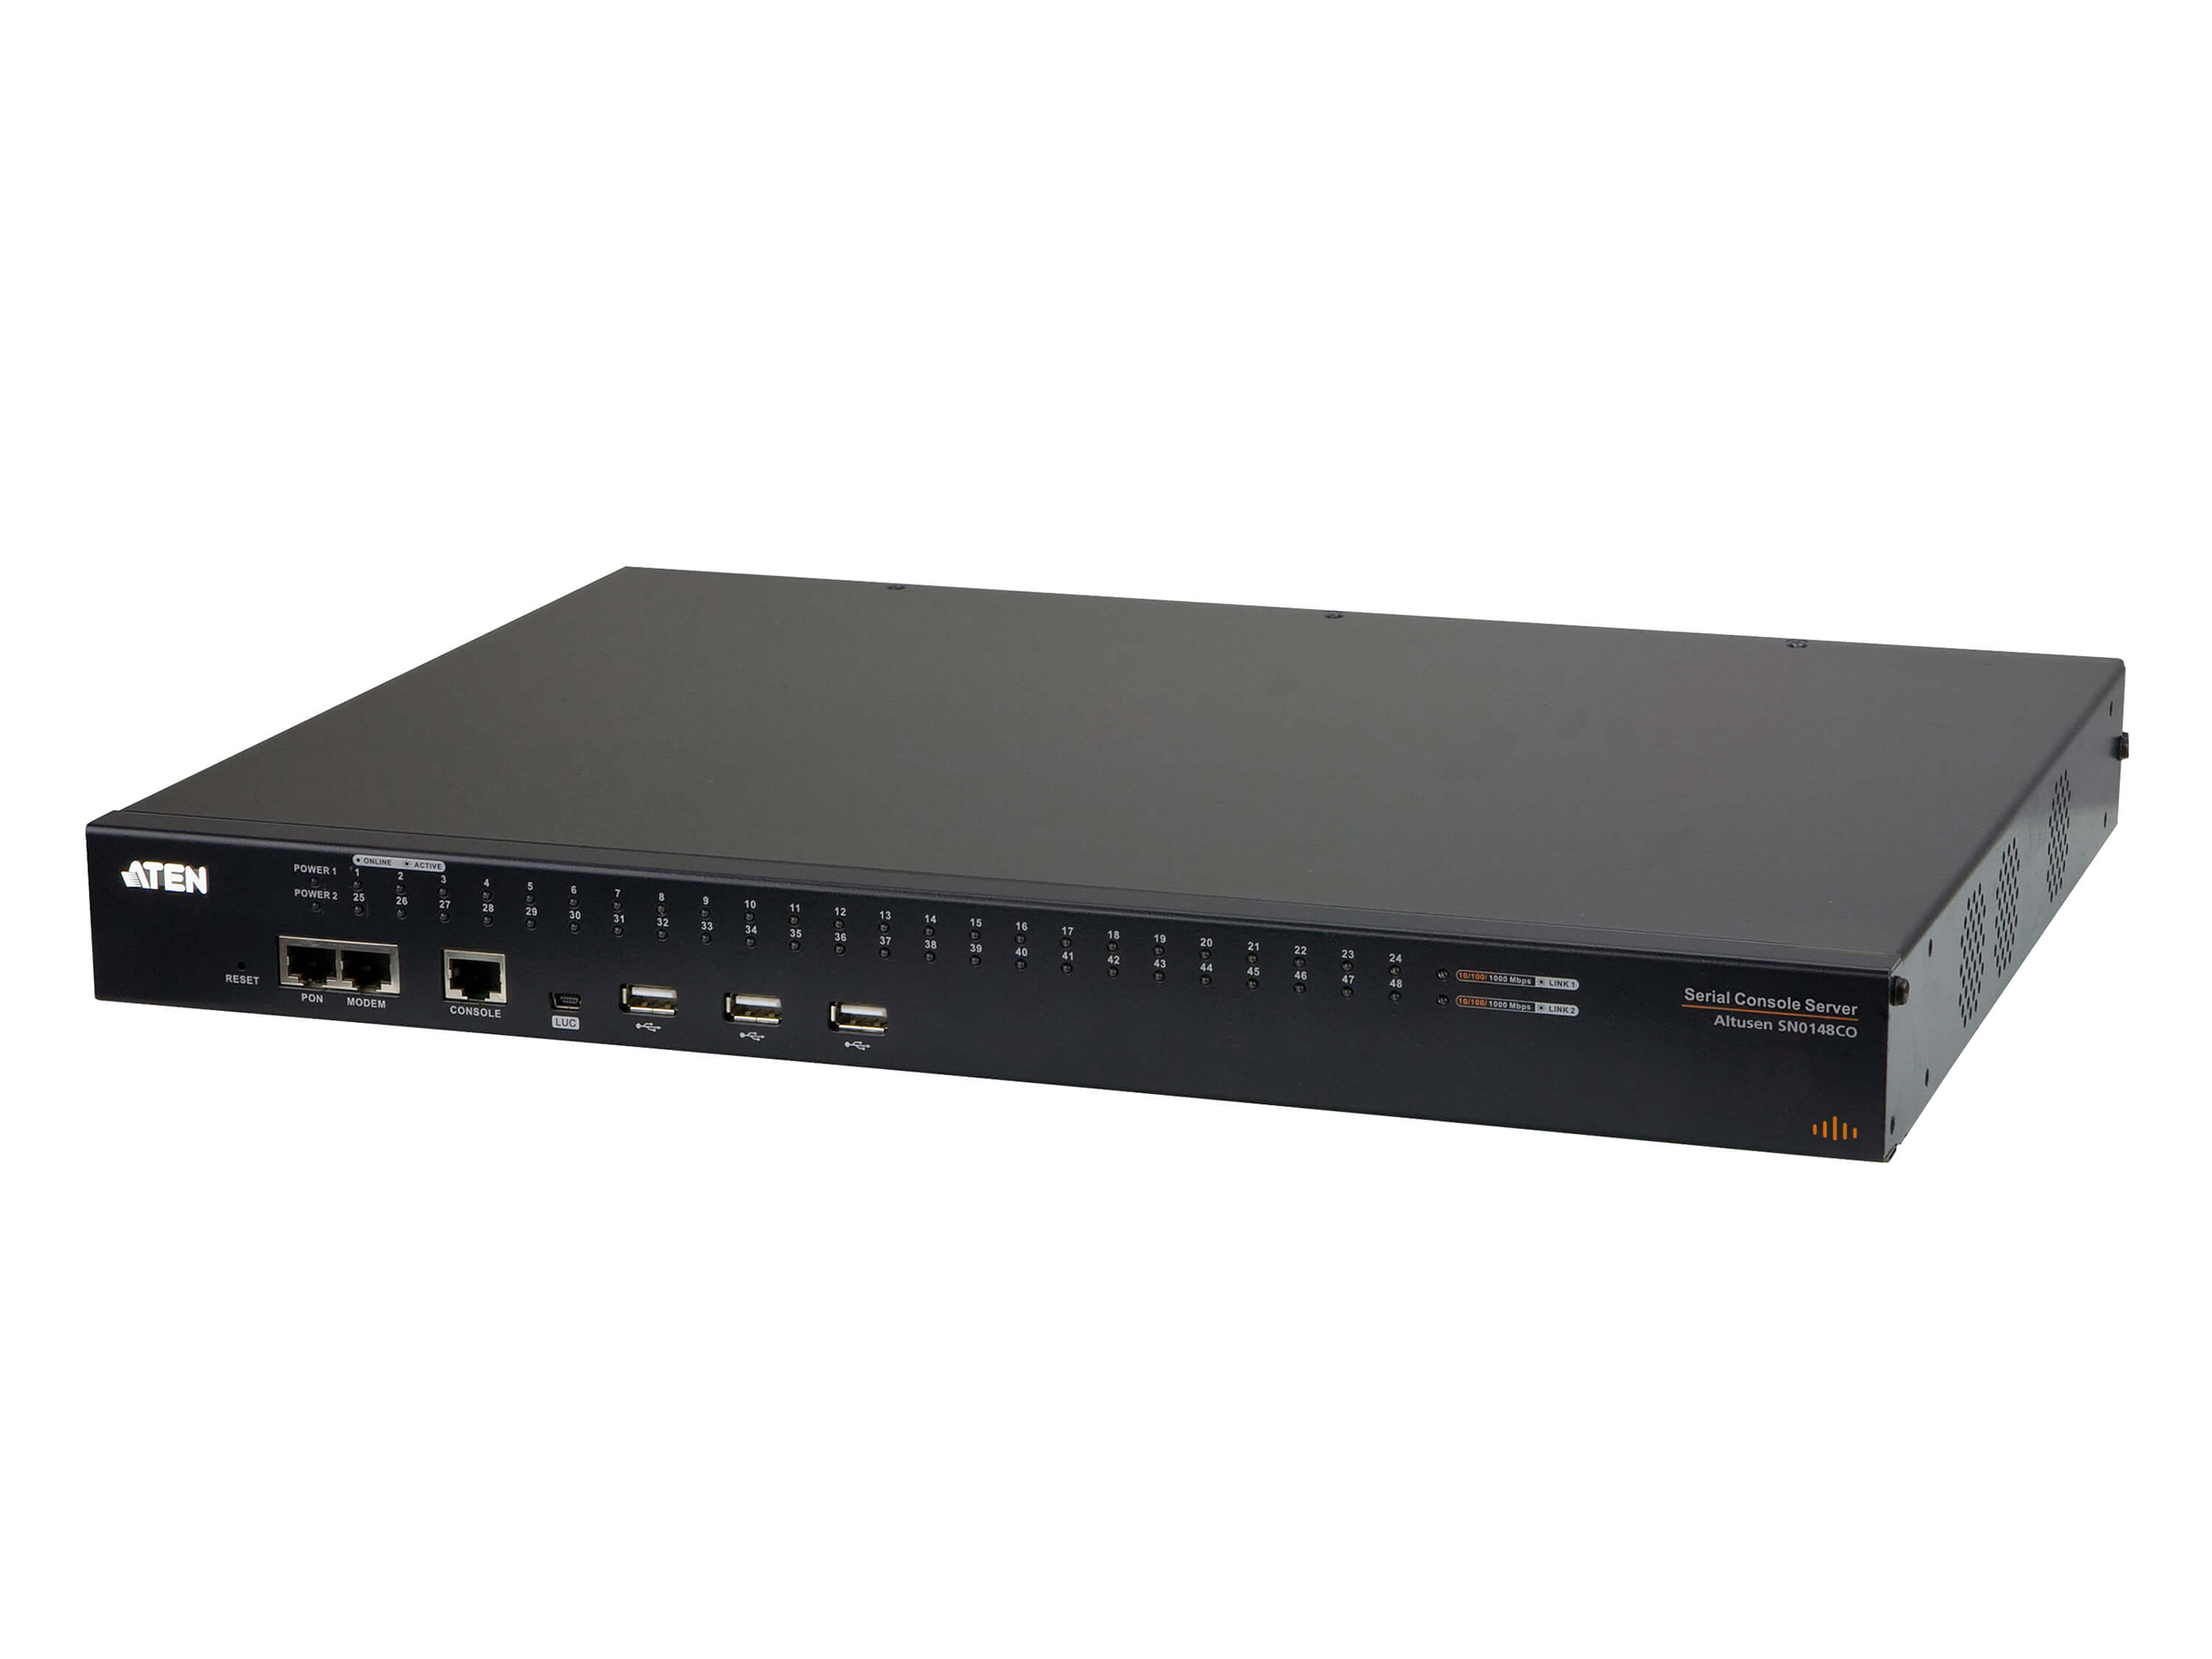 SN0148CO 48-Port Serial Console Server with Dual Power/LAN by Aten